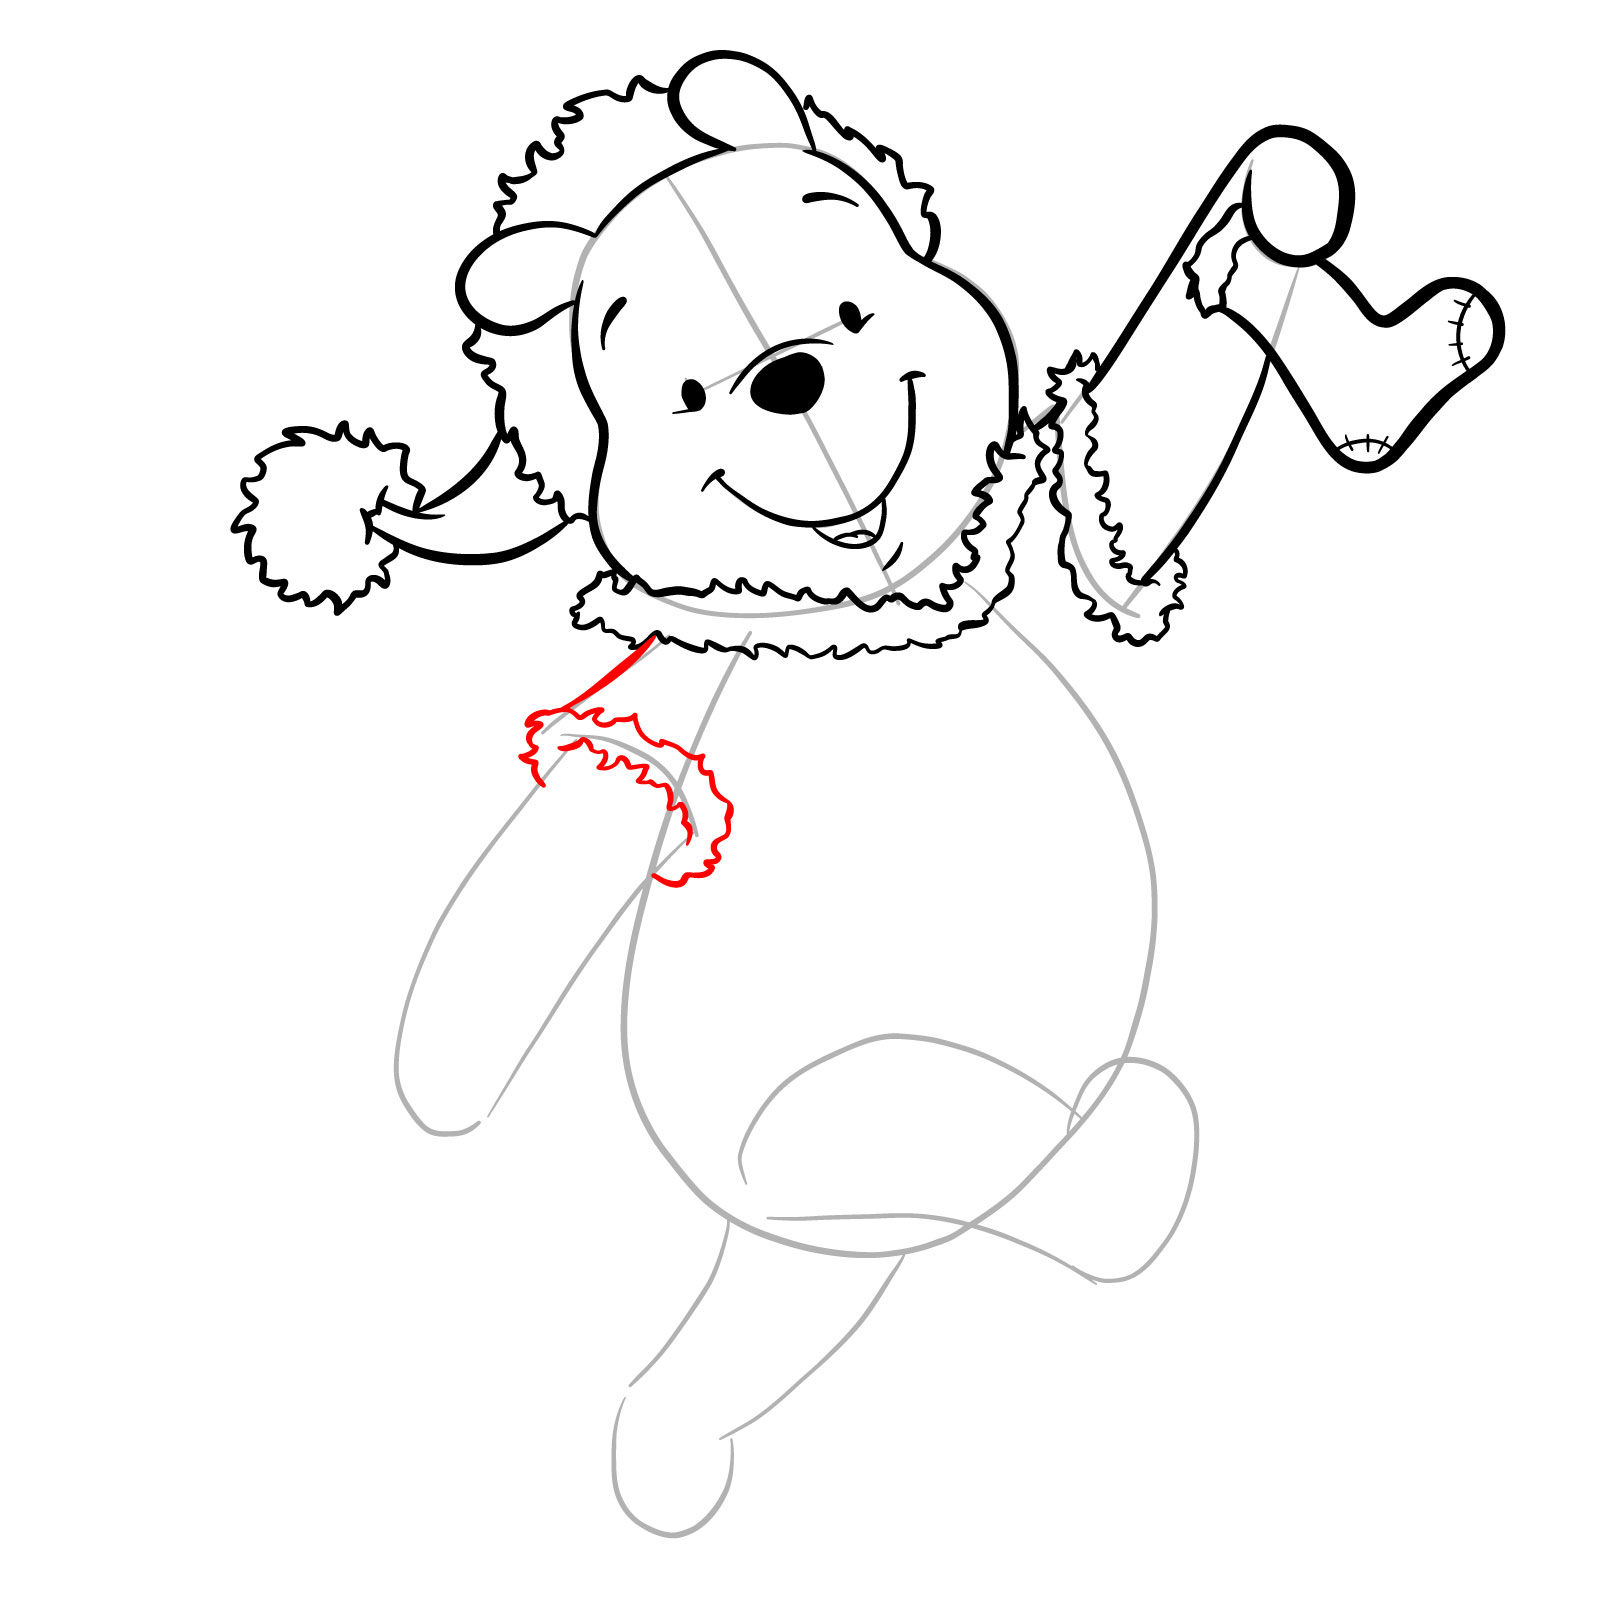 How to draw Winnie-the-Pooh Christmas style - step 20